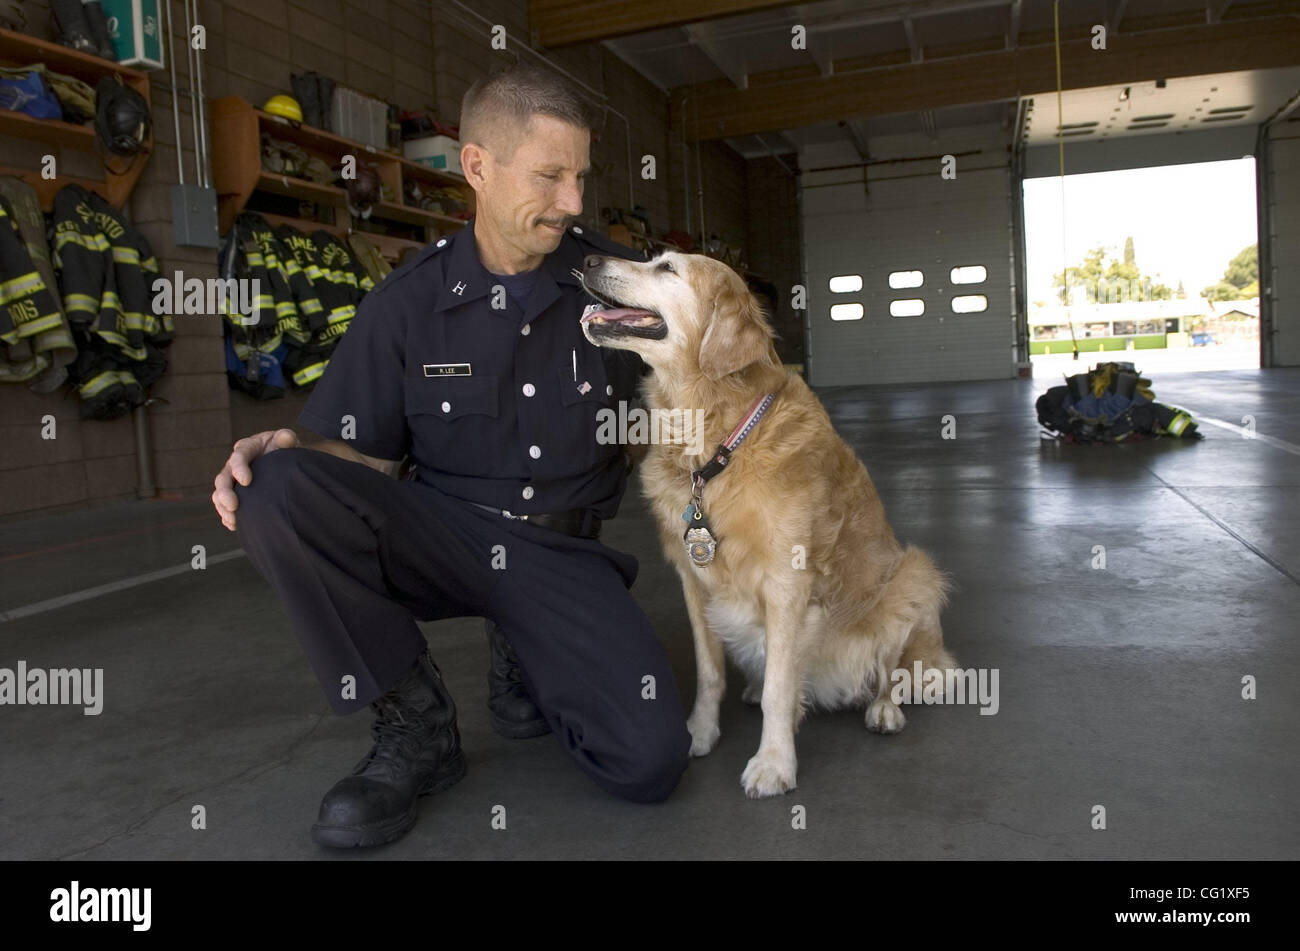 Cpt. Rick Lee of the Sacramento Fire Department Station 56 says he'll retire Ana (cq on 1 n) later this year. She has been working since 1997 and is the first California urban search and rescue dog. Ana went to the World Trade Center aftermath of Sept. 11 as well as Hurricane Katrina. The Sacramento Stock Photo